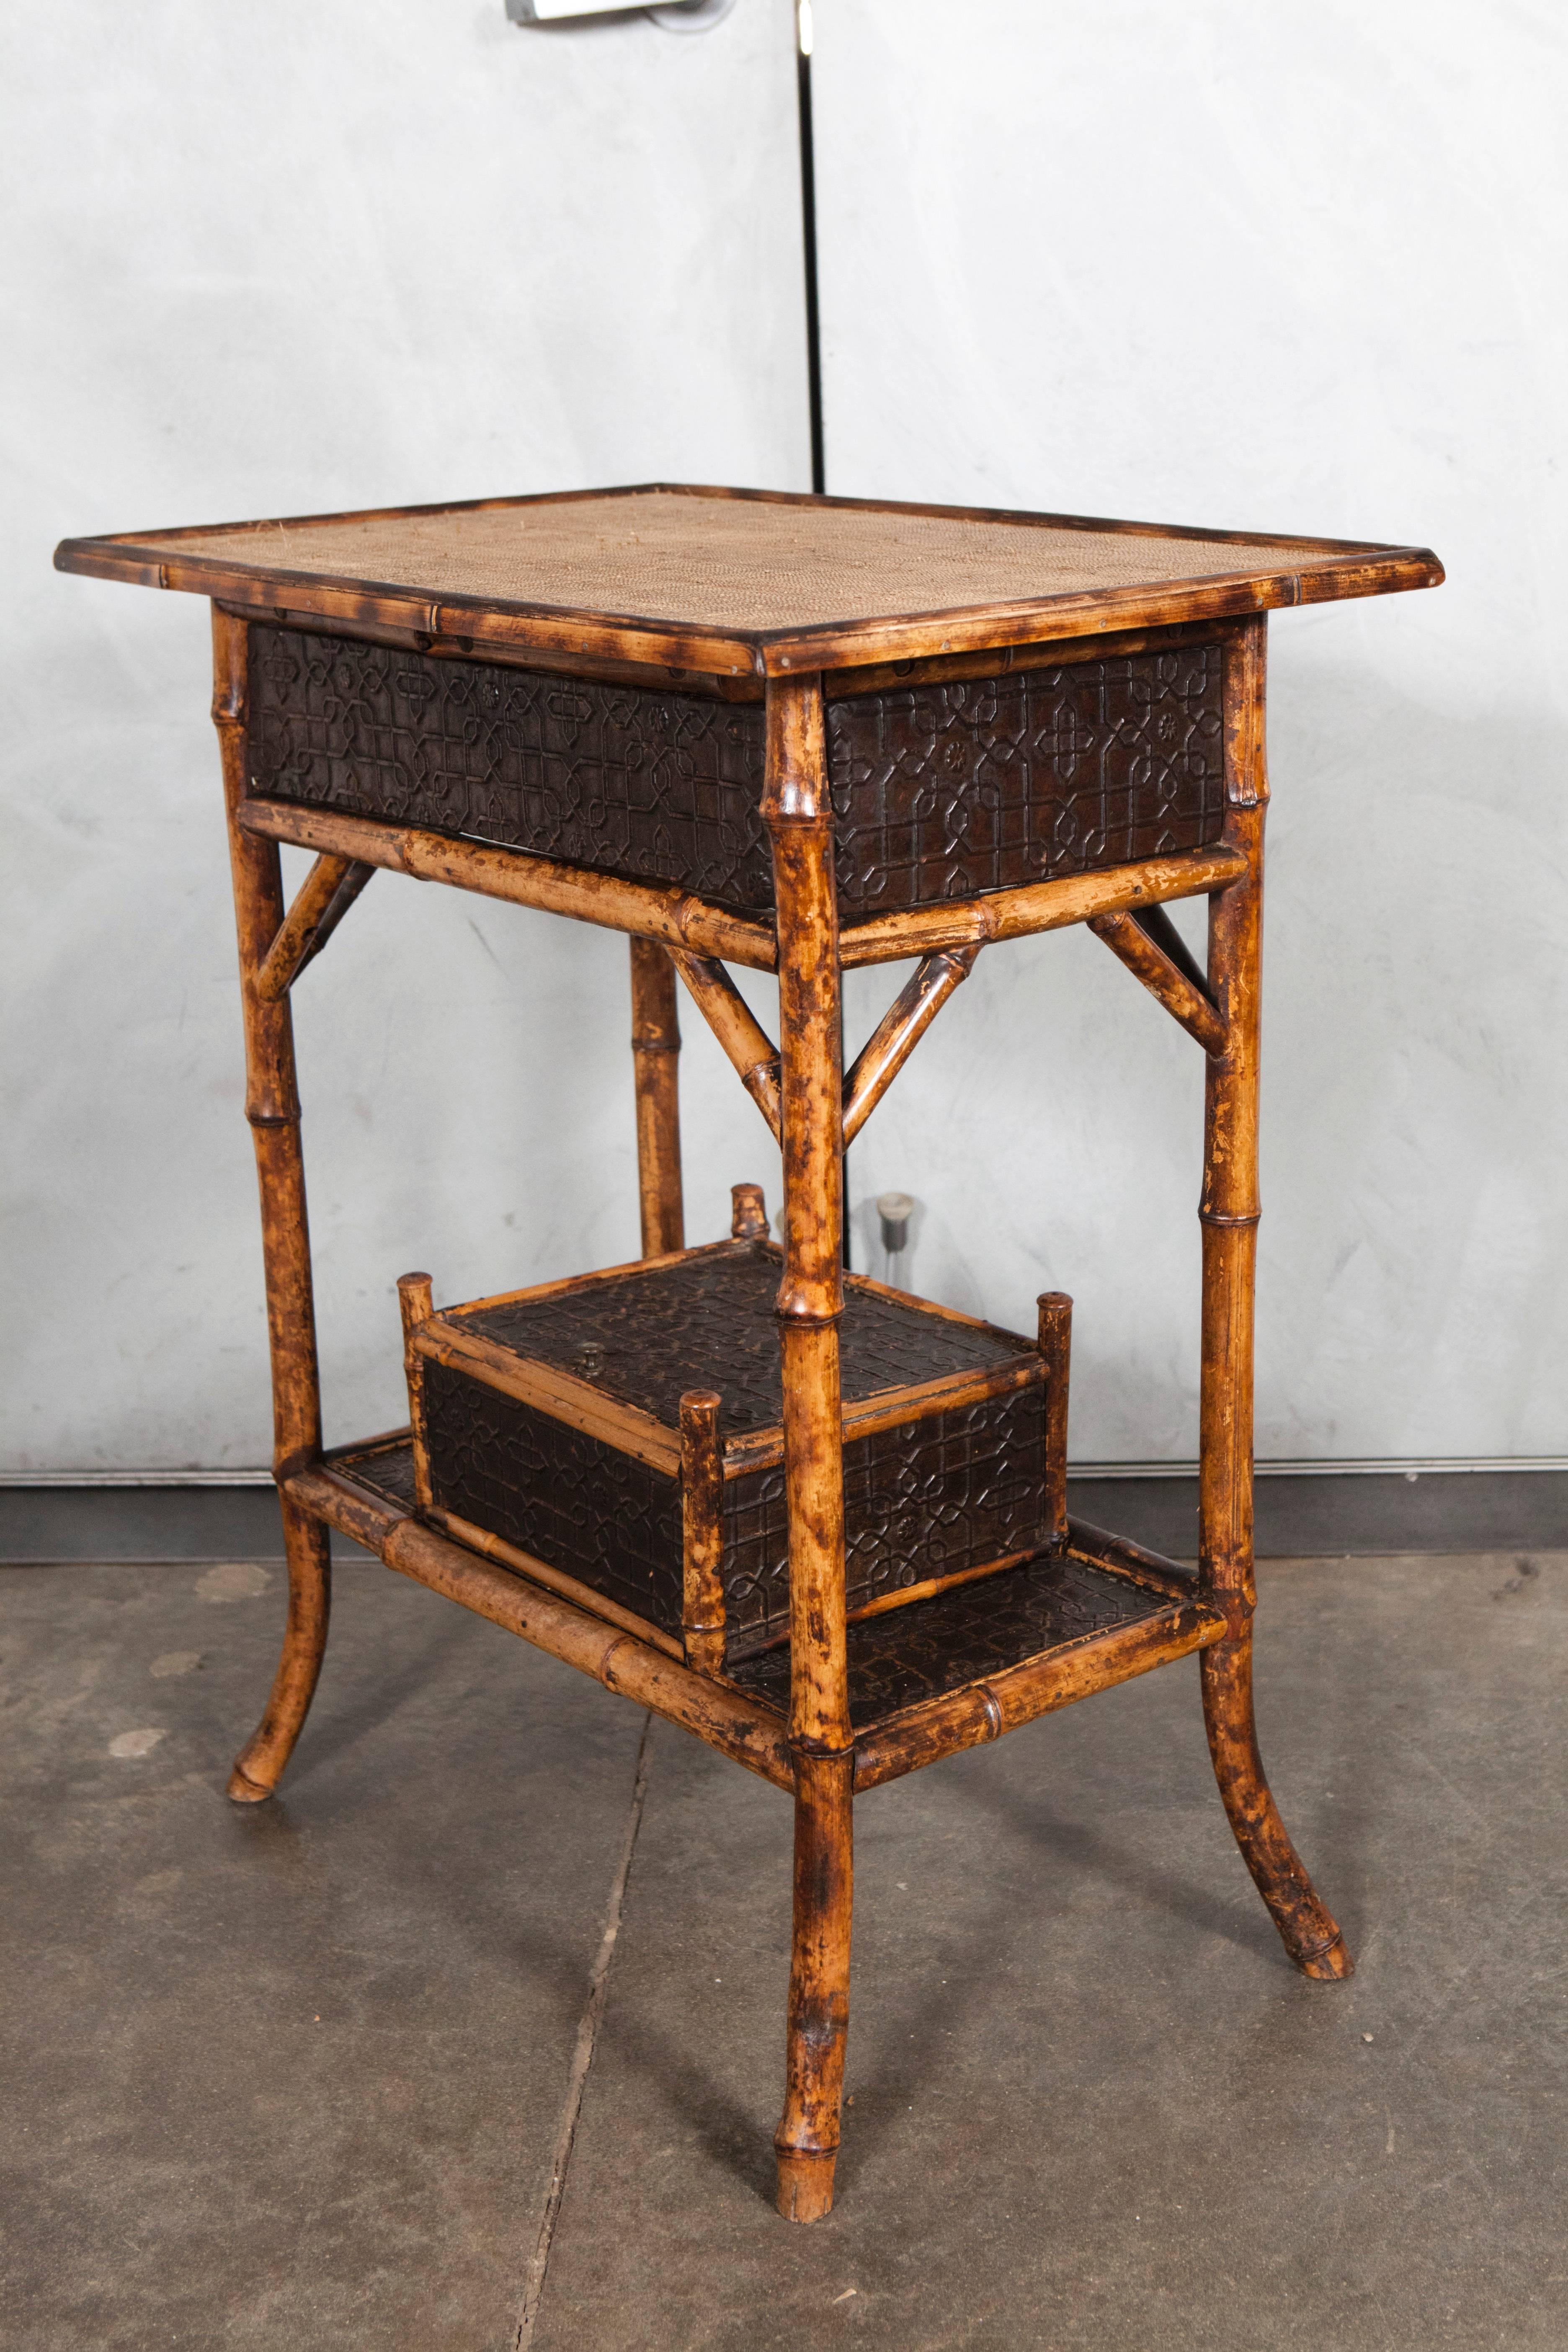 This table has a number of interesting details including the rare pressed patterned paper material used for the lower surfaces and the built in keepsake box on the shelf. This unique Victorian tiger bamboo side table is suited for a variety of